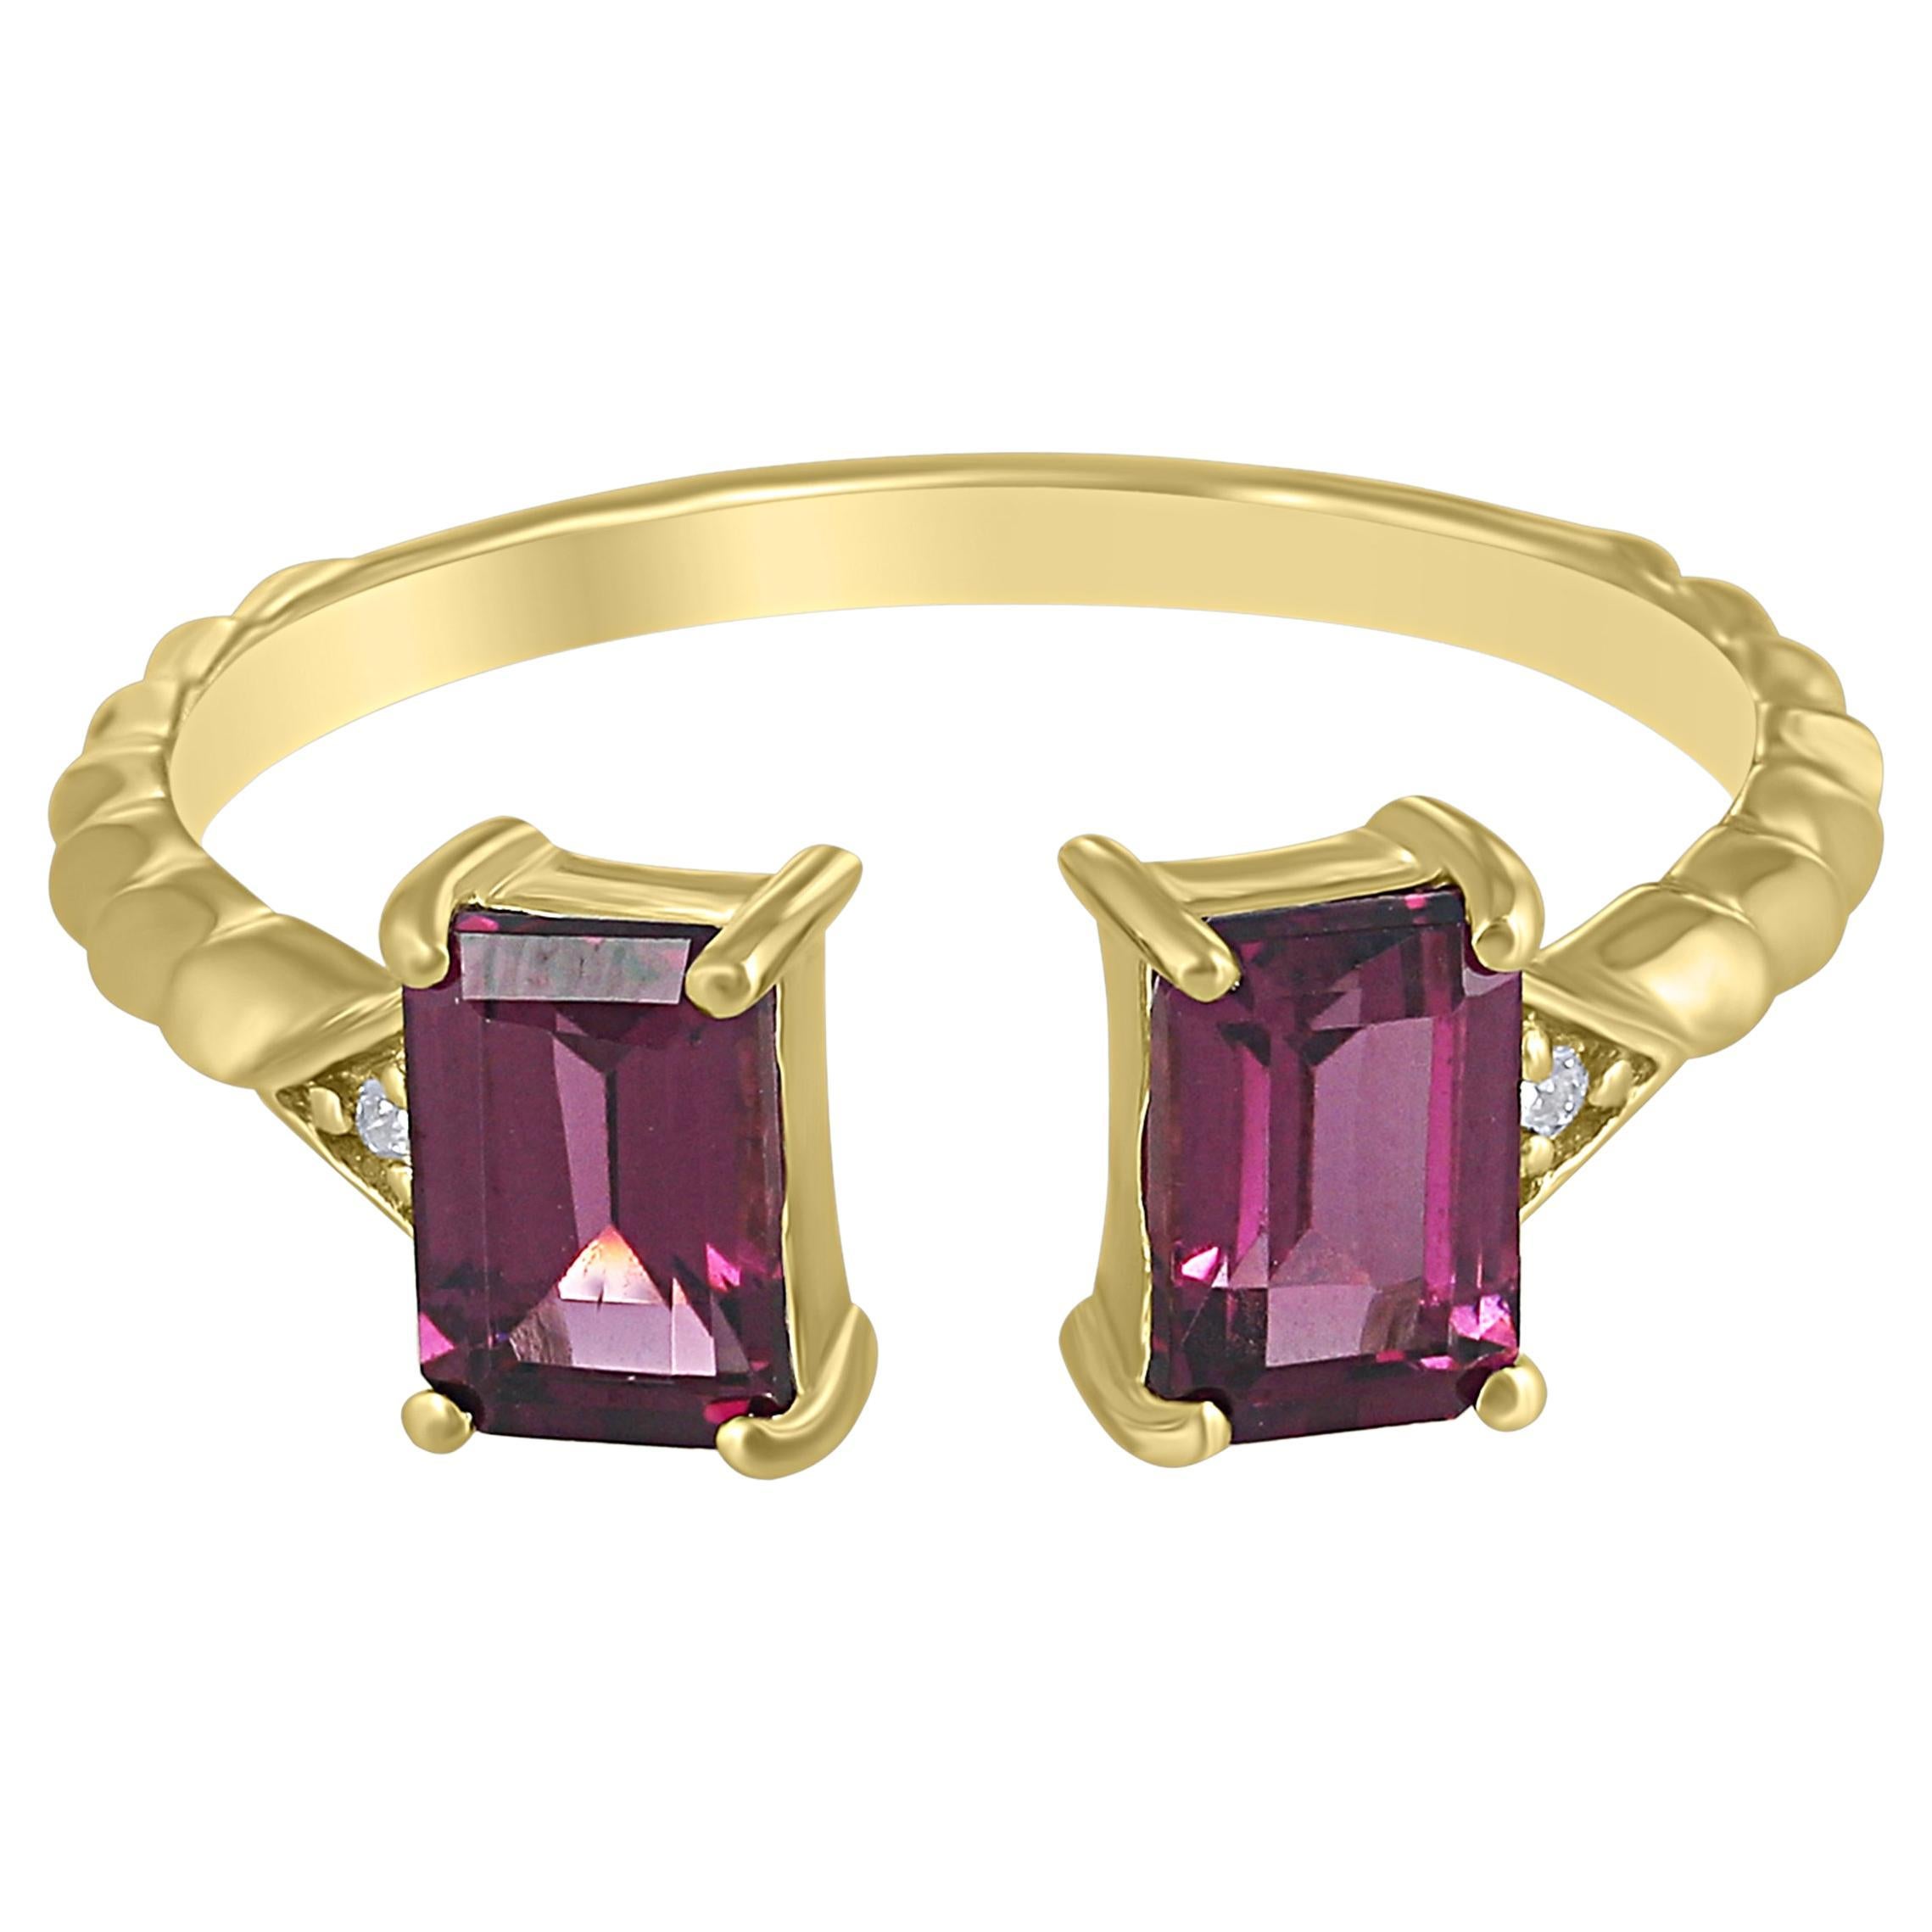 Gemistry 1.57 Cttw. Rhodolite and Diamond Cuff Ring in 14K Yellow Gold For Sale